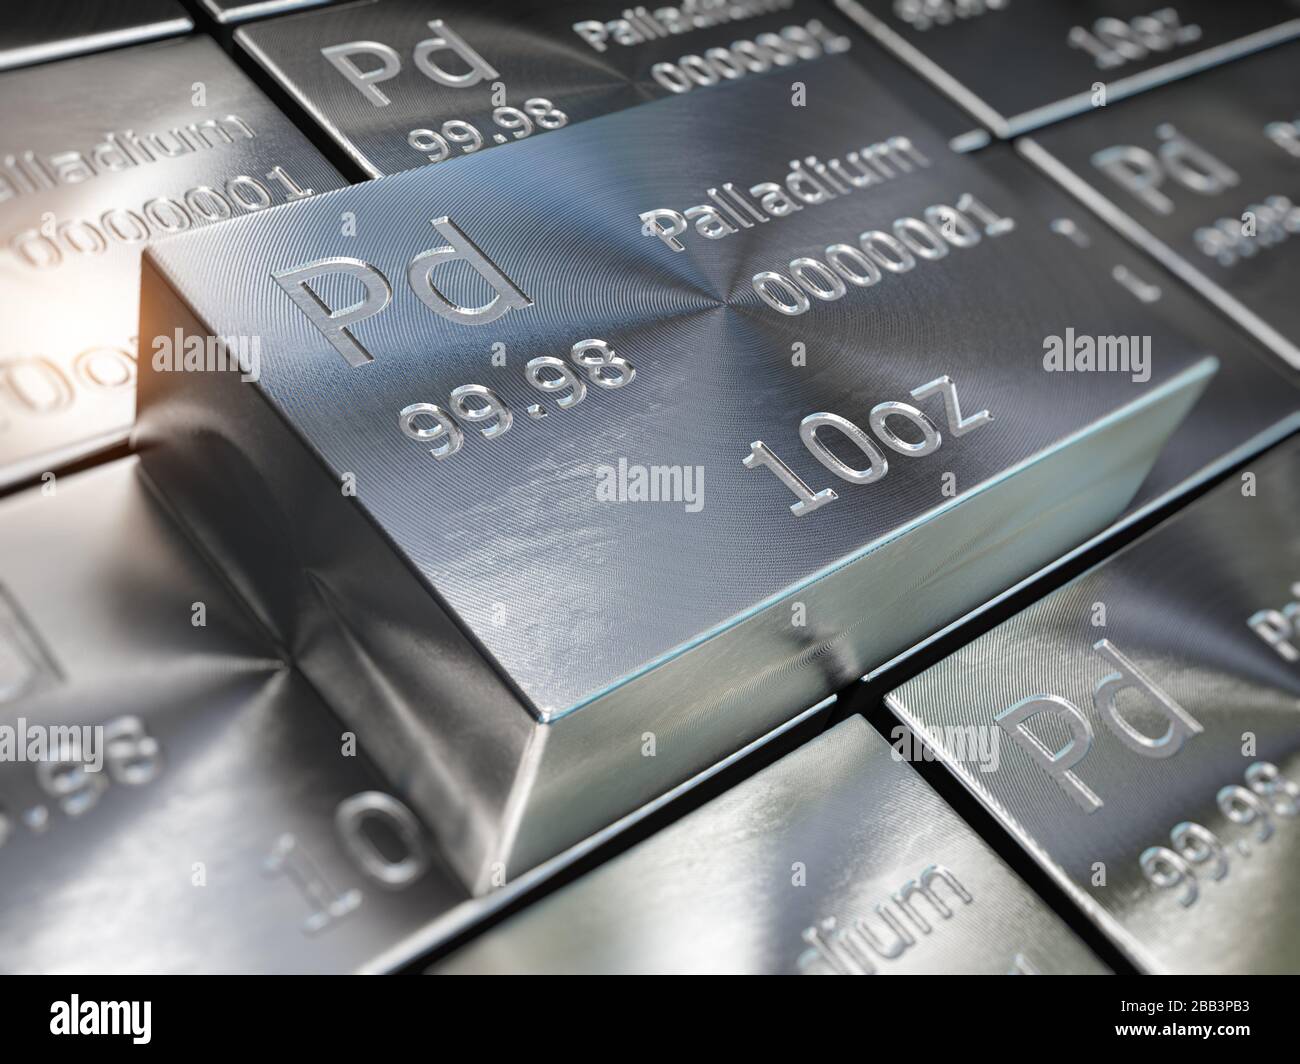 Palladium Metal High Resolution Stock Photography and Images - Alamy